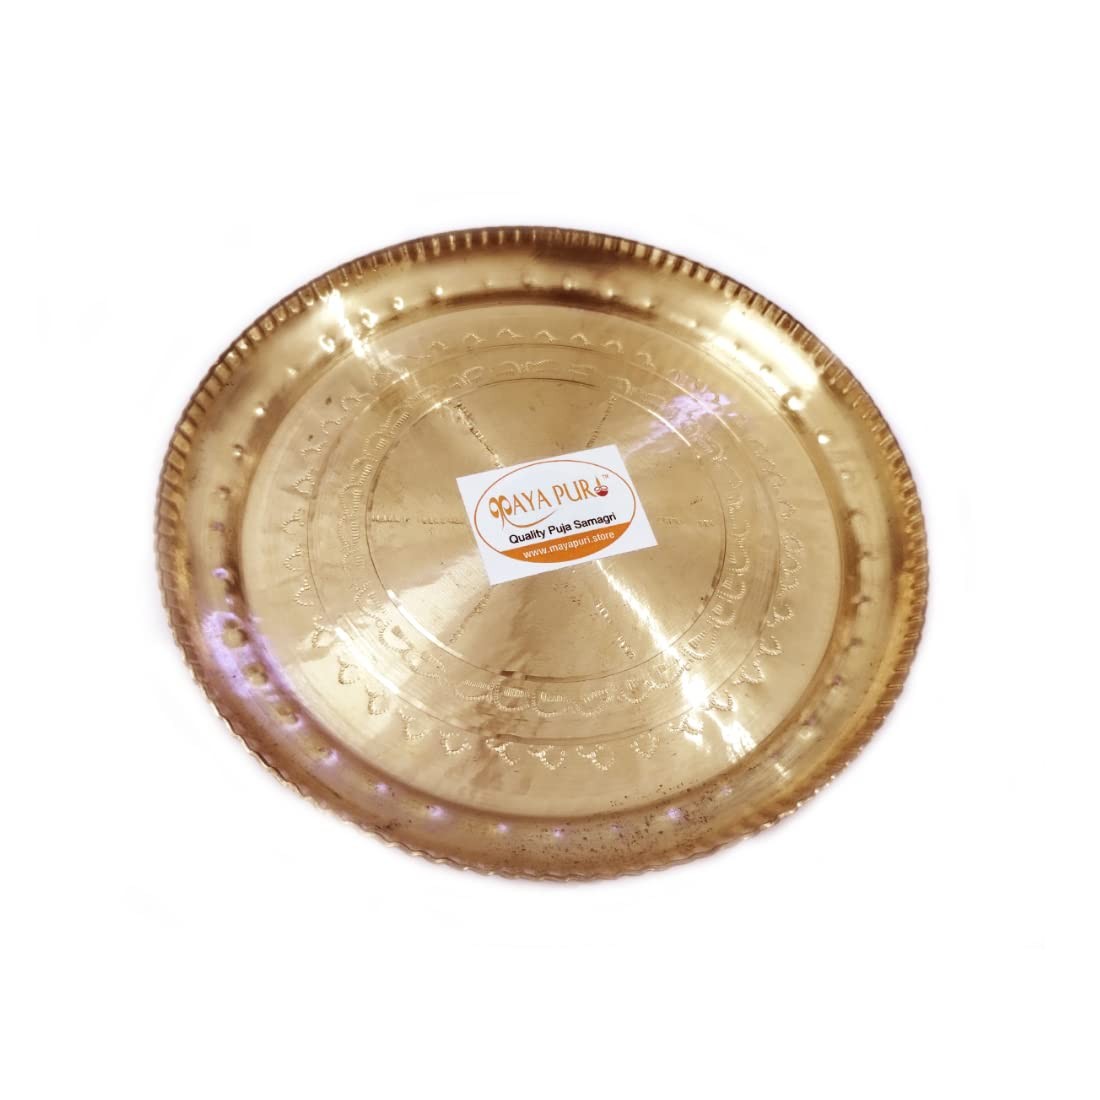 Pital Puja Thali/Brass Bhog Thali for Worship, Engraved Design, Golden Color, Diameter: 6.5 Inches